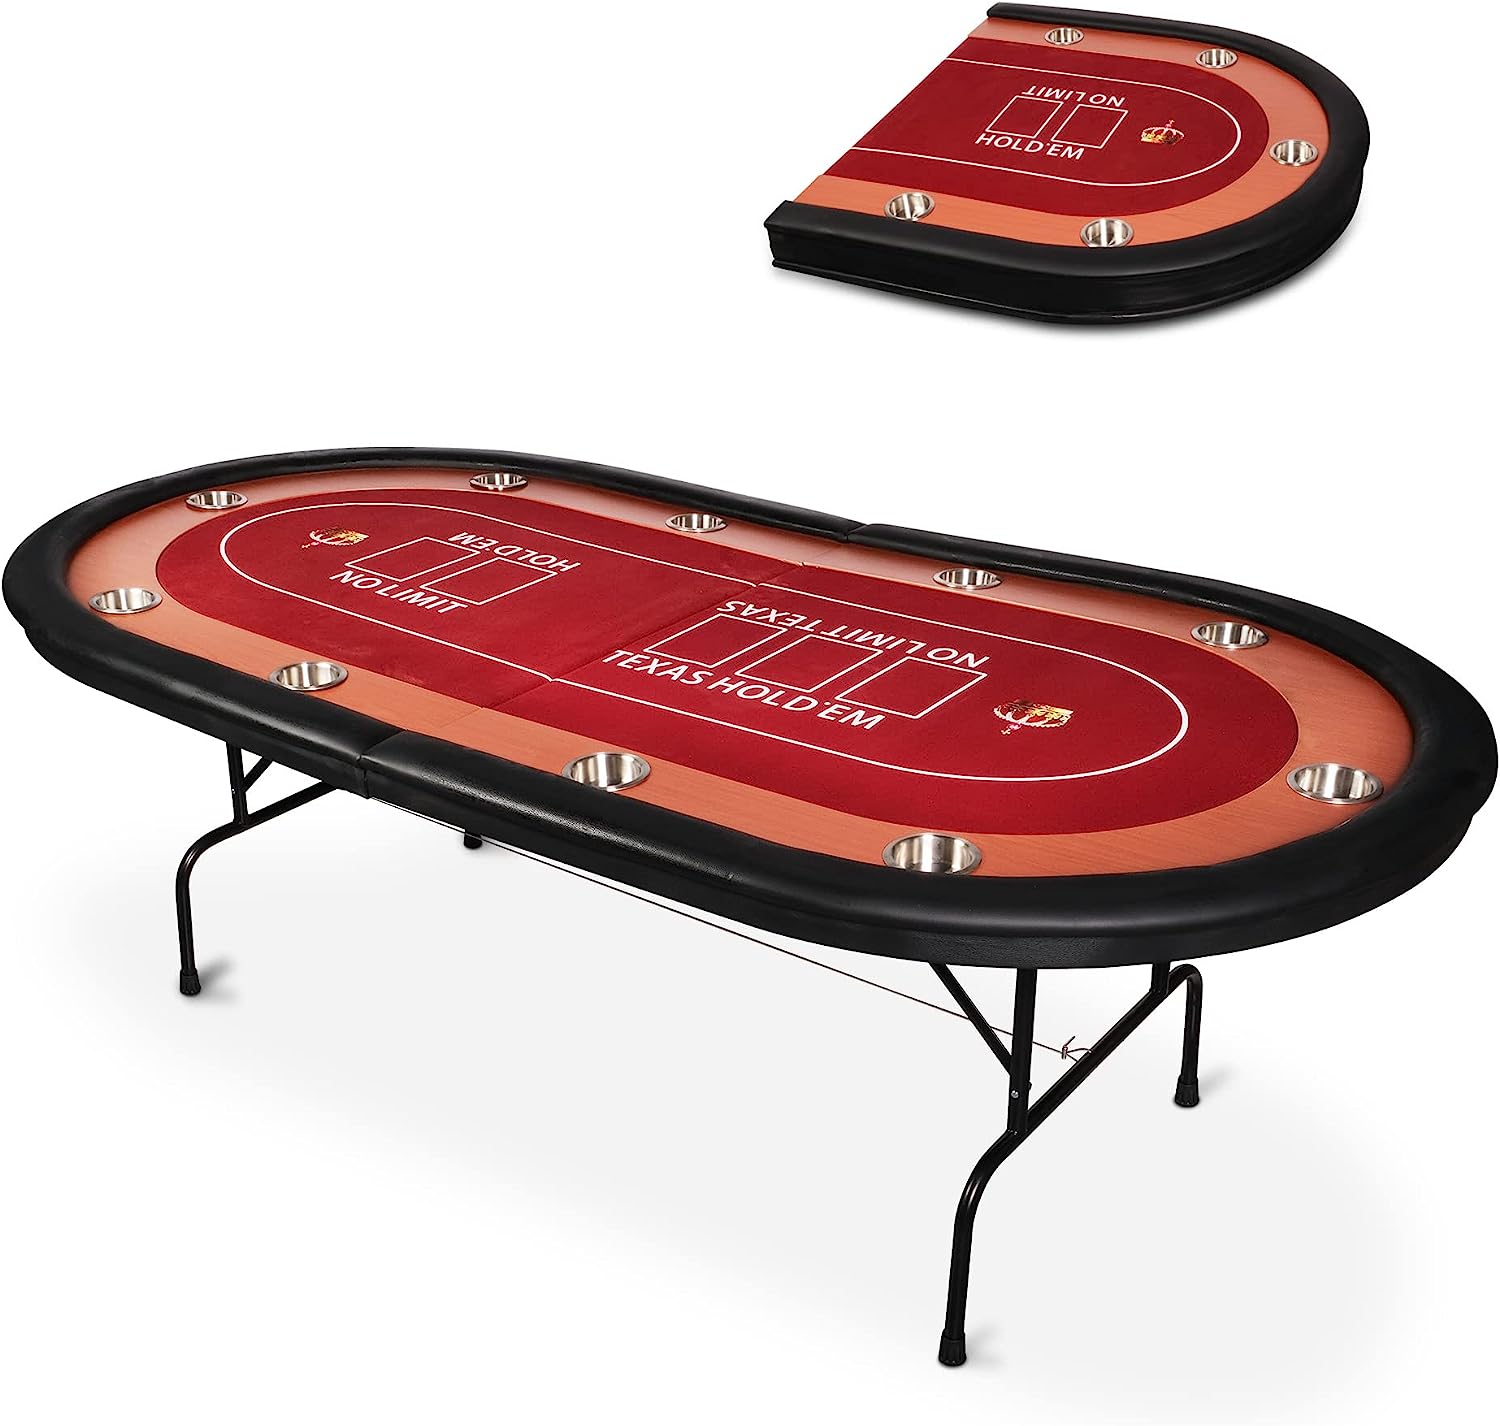 90.5" Large Folding Poker Table 10 Player Casino Texas Holdem Table for Card Game, Red